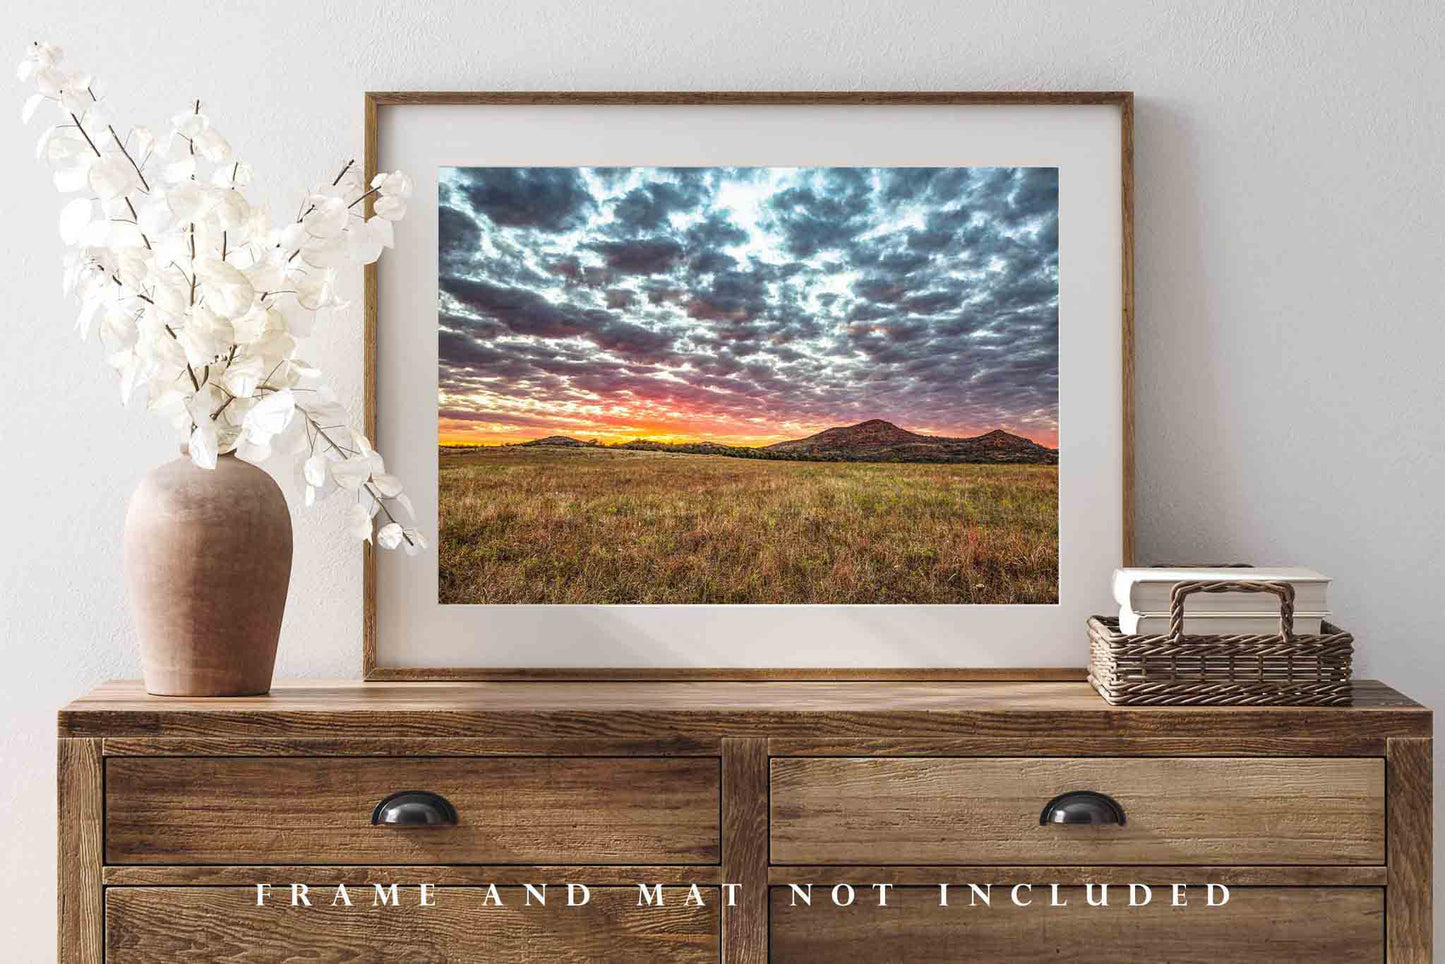 Landscape Photography Print - Wall Art Picture of Scenic Sunset Over Wichita Mountains near Lawton in Southwest Oklahoma Scenery Decor